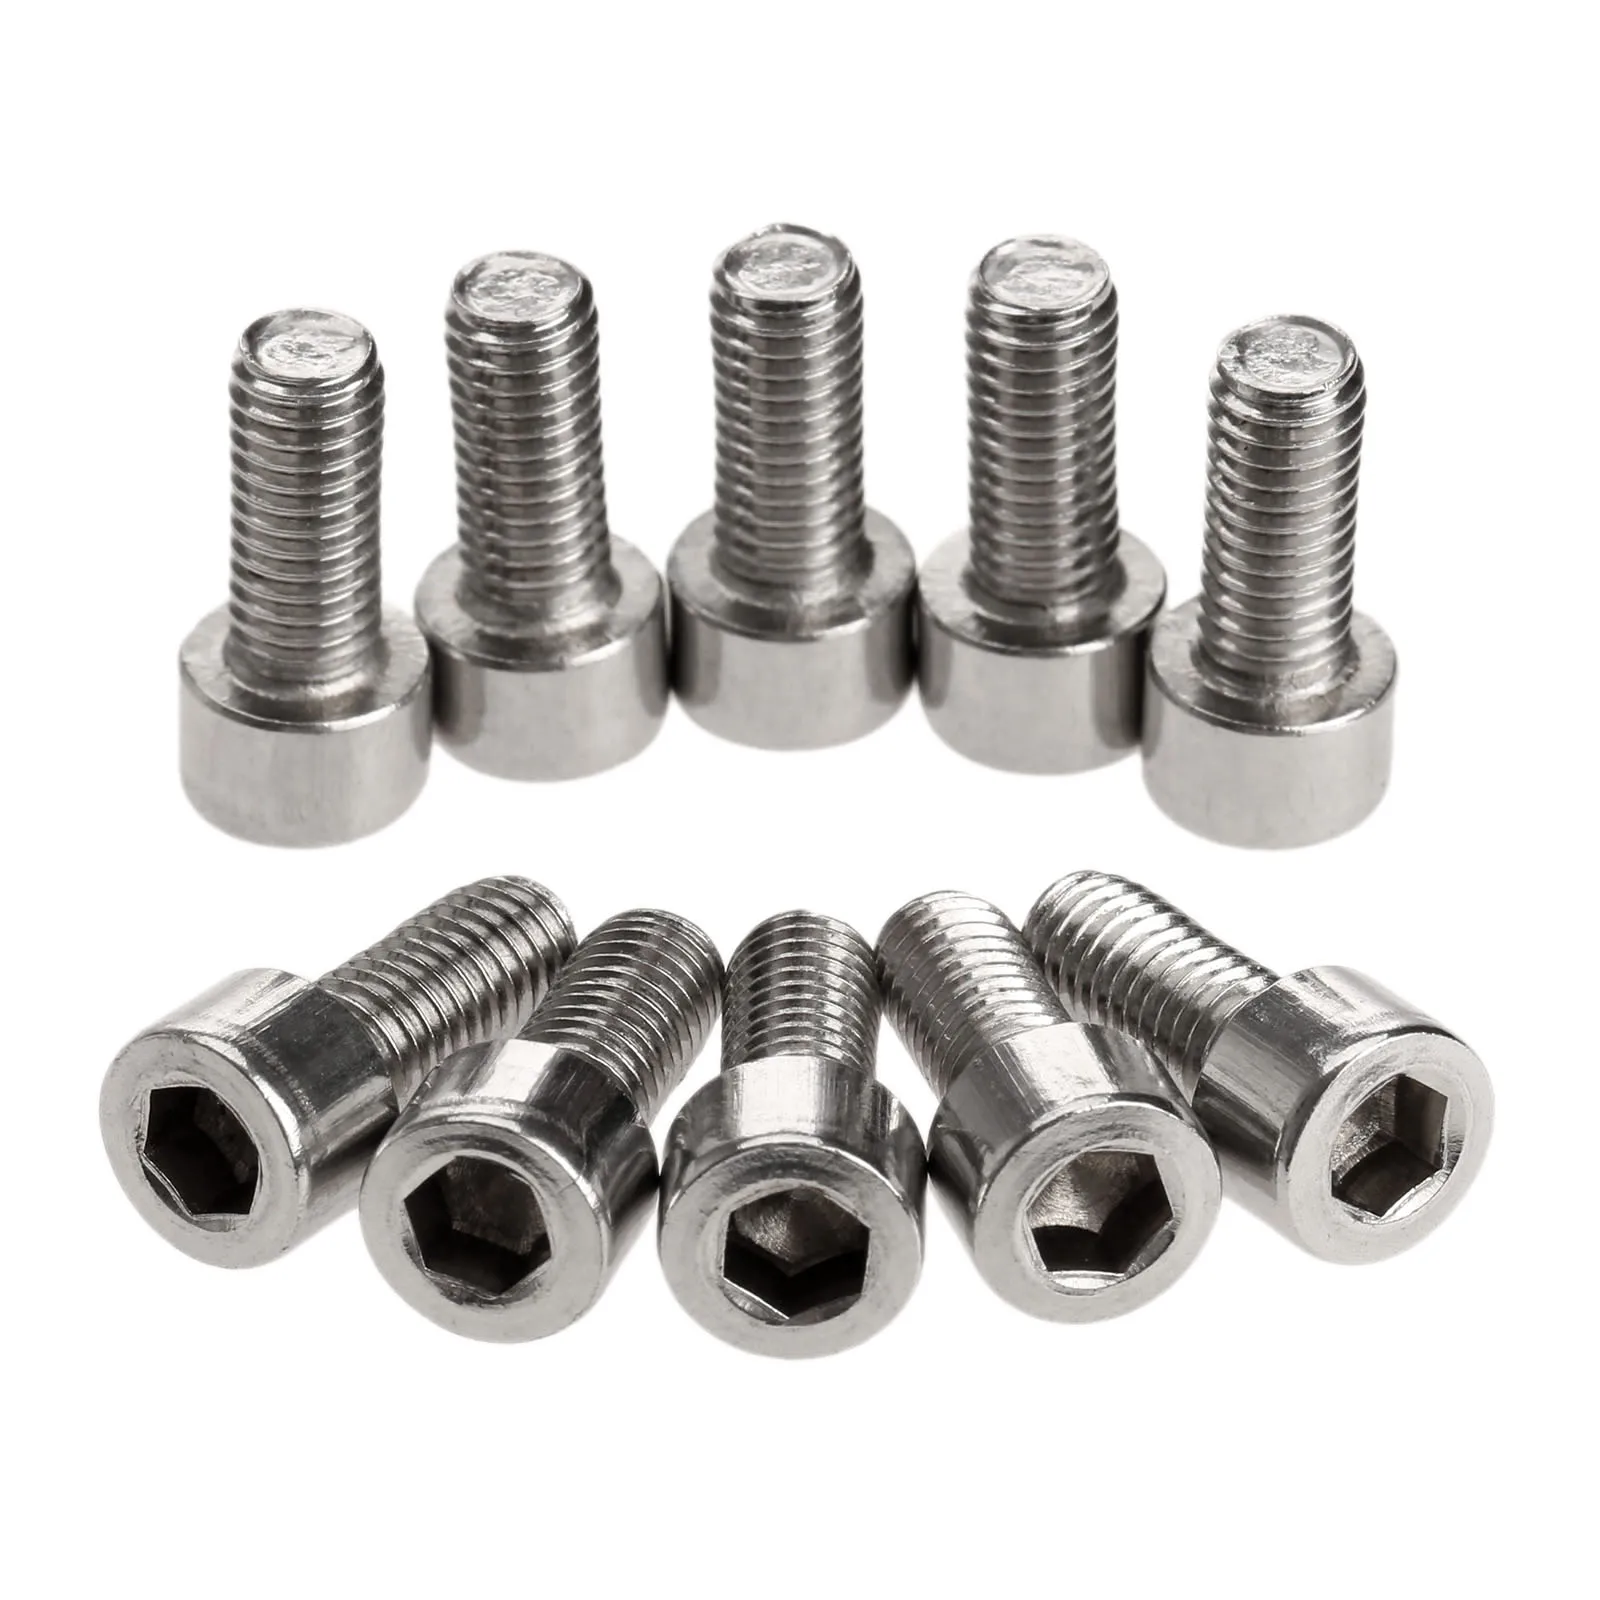 10Pcs Stainless Steel Bicycle Screws for Most Mountain Bike Water Bottle Holder Cages Racks Enhancement M5 Hexagon Bolt Screws